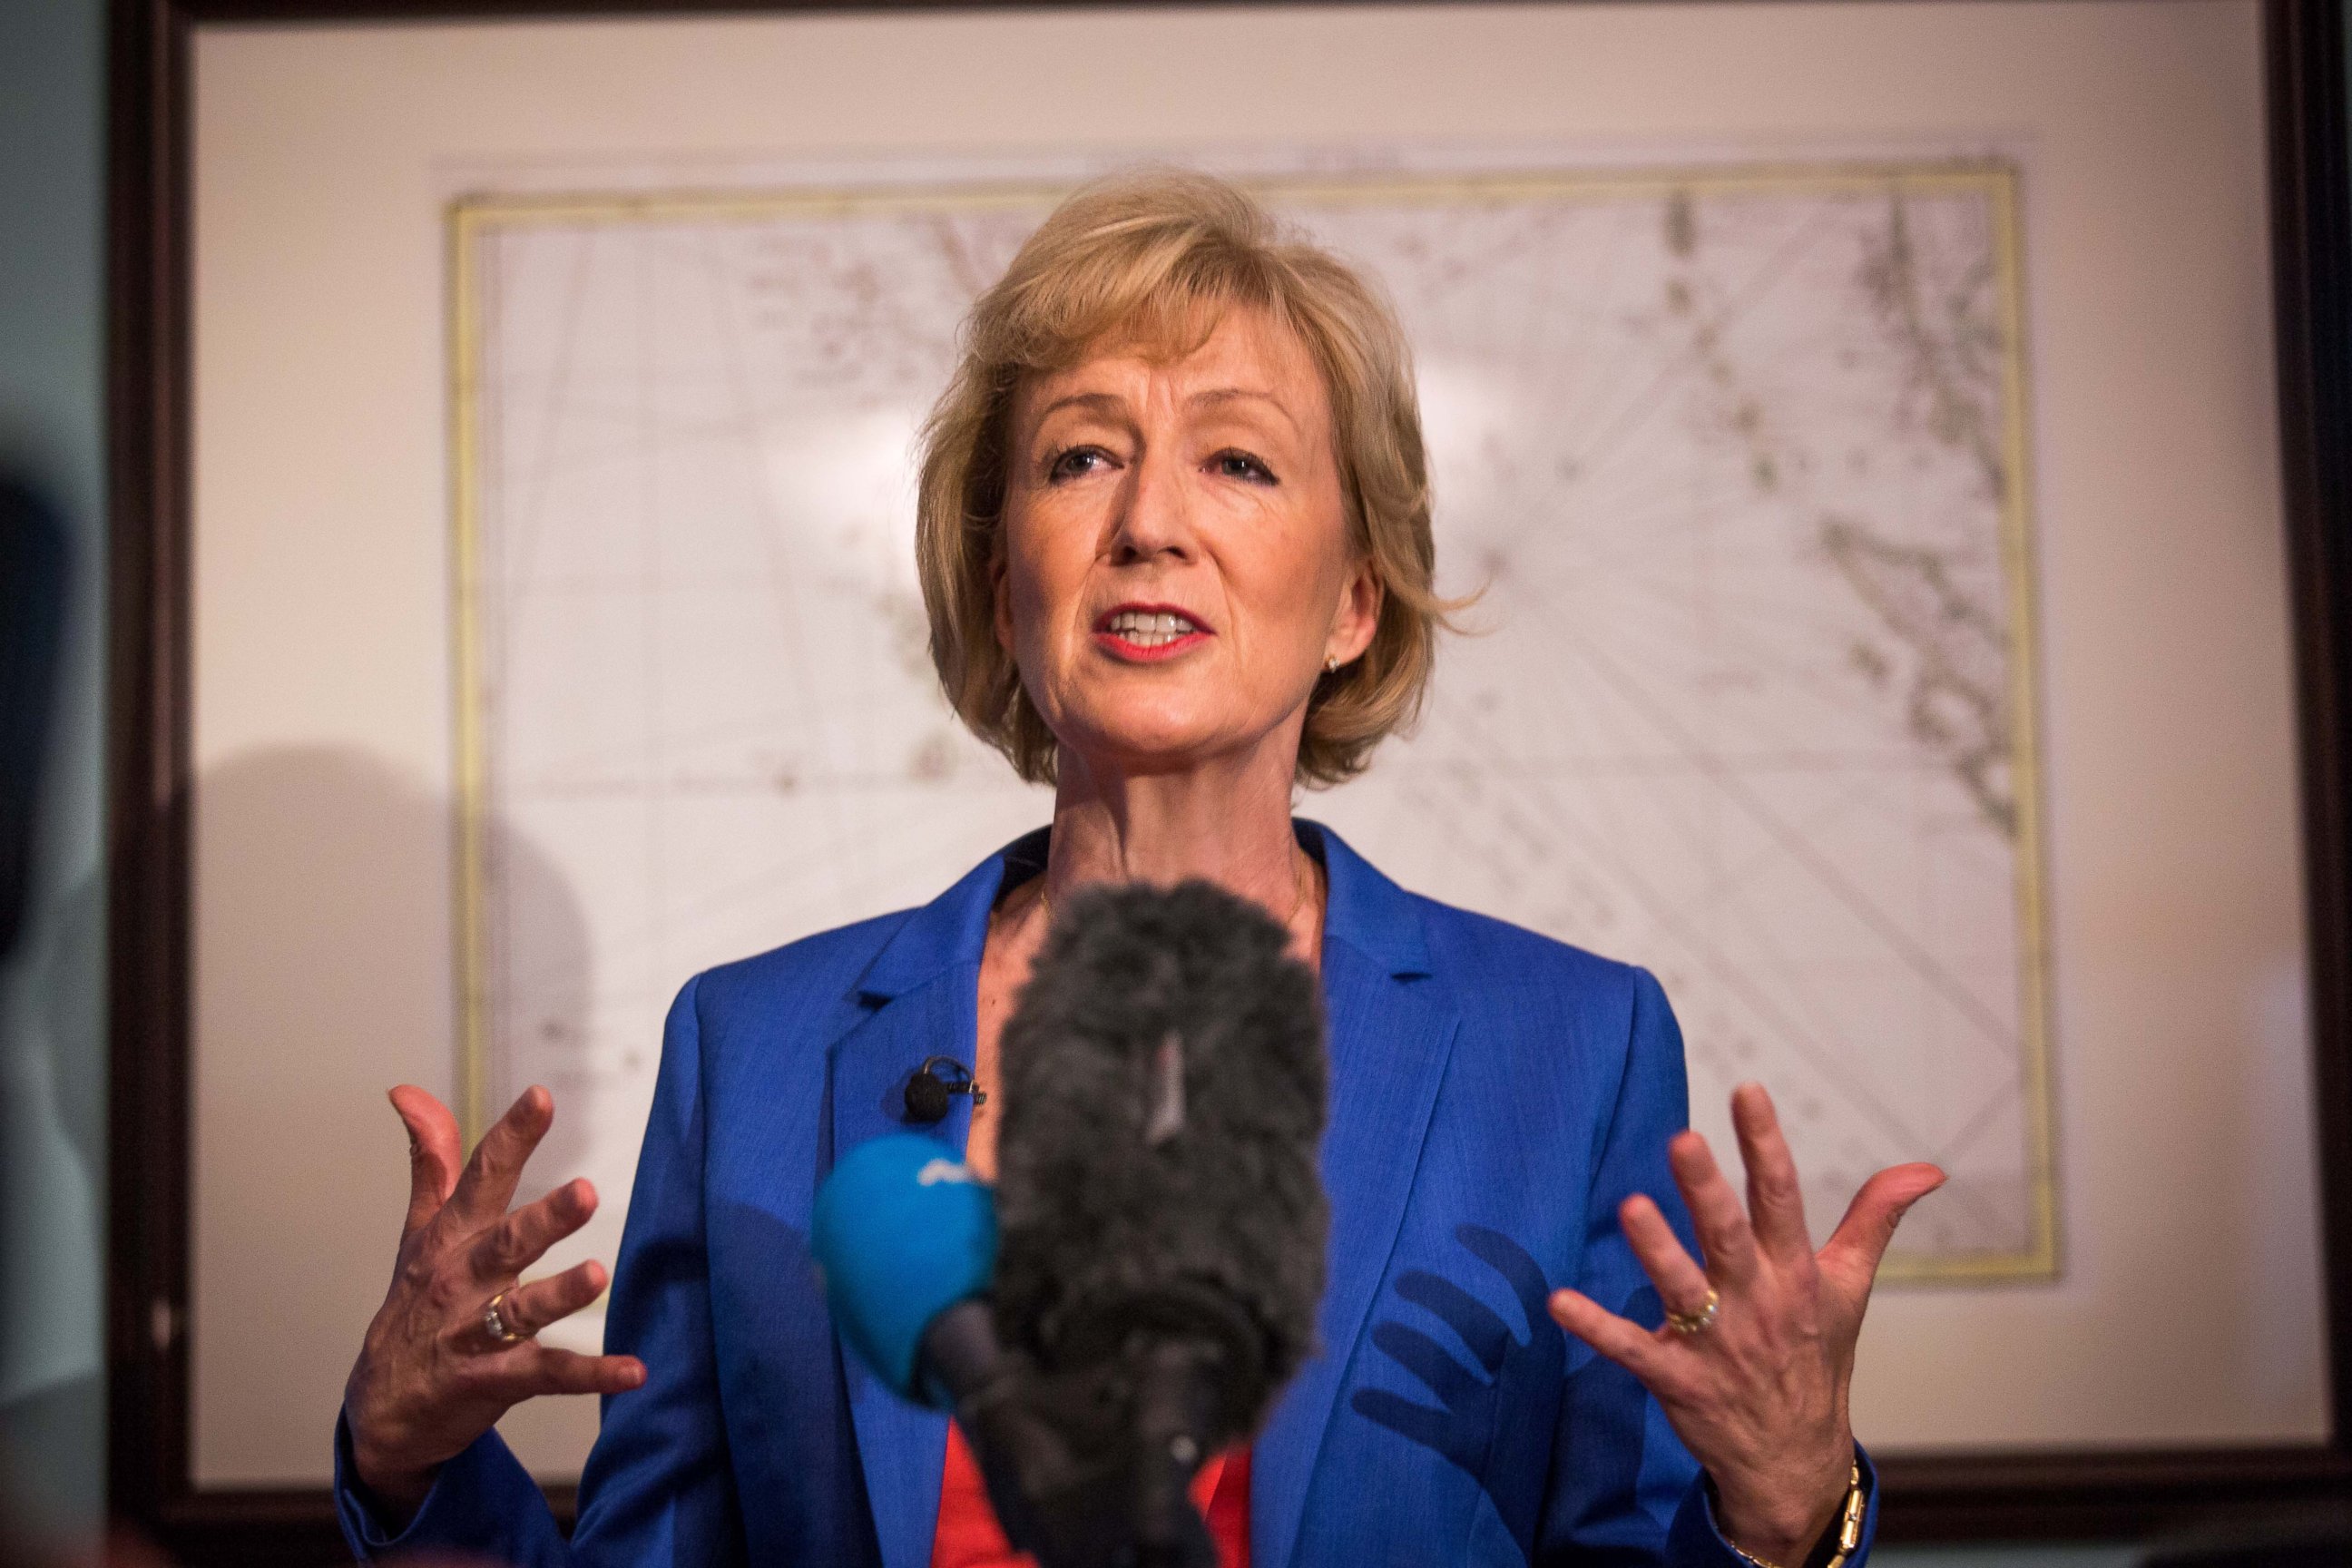 PHOTO: Andrea Leadsom, Member of Parliament for South Northamptonshire and Minister of State at Department of Energy and Climate Change, launches her bid to be the Leader of the Conservative Party Westminster, July 4, 2016, in London.